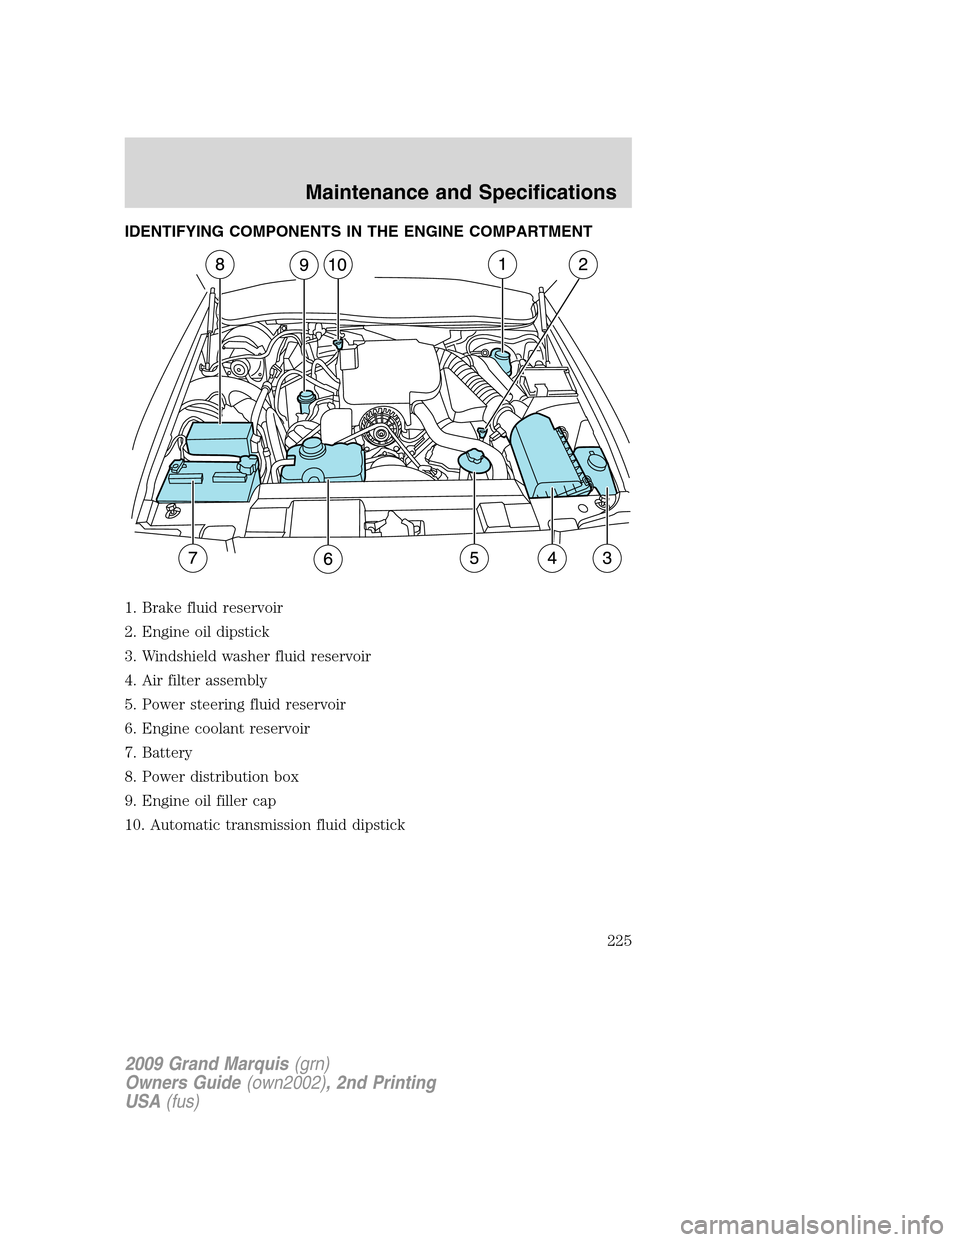 Mercury Grand Marquis 2009  s User Guide IDENTIFYING COMPONENTS IN THE ENGINE COMPARTMENT
1. Brake fluid reservoir
2. Engine oil dipstick
3. Windshield washer fluid reservoir
4. Air filter assembly
5. Power steering fluid reservoir
6. Engine